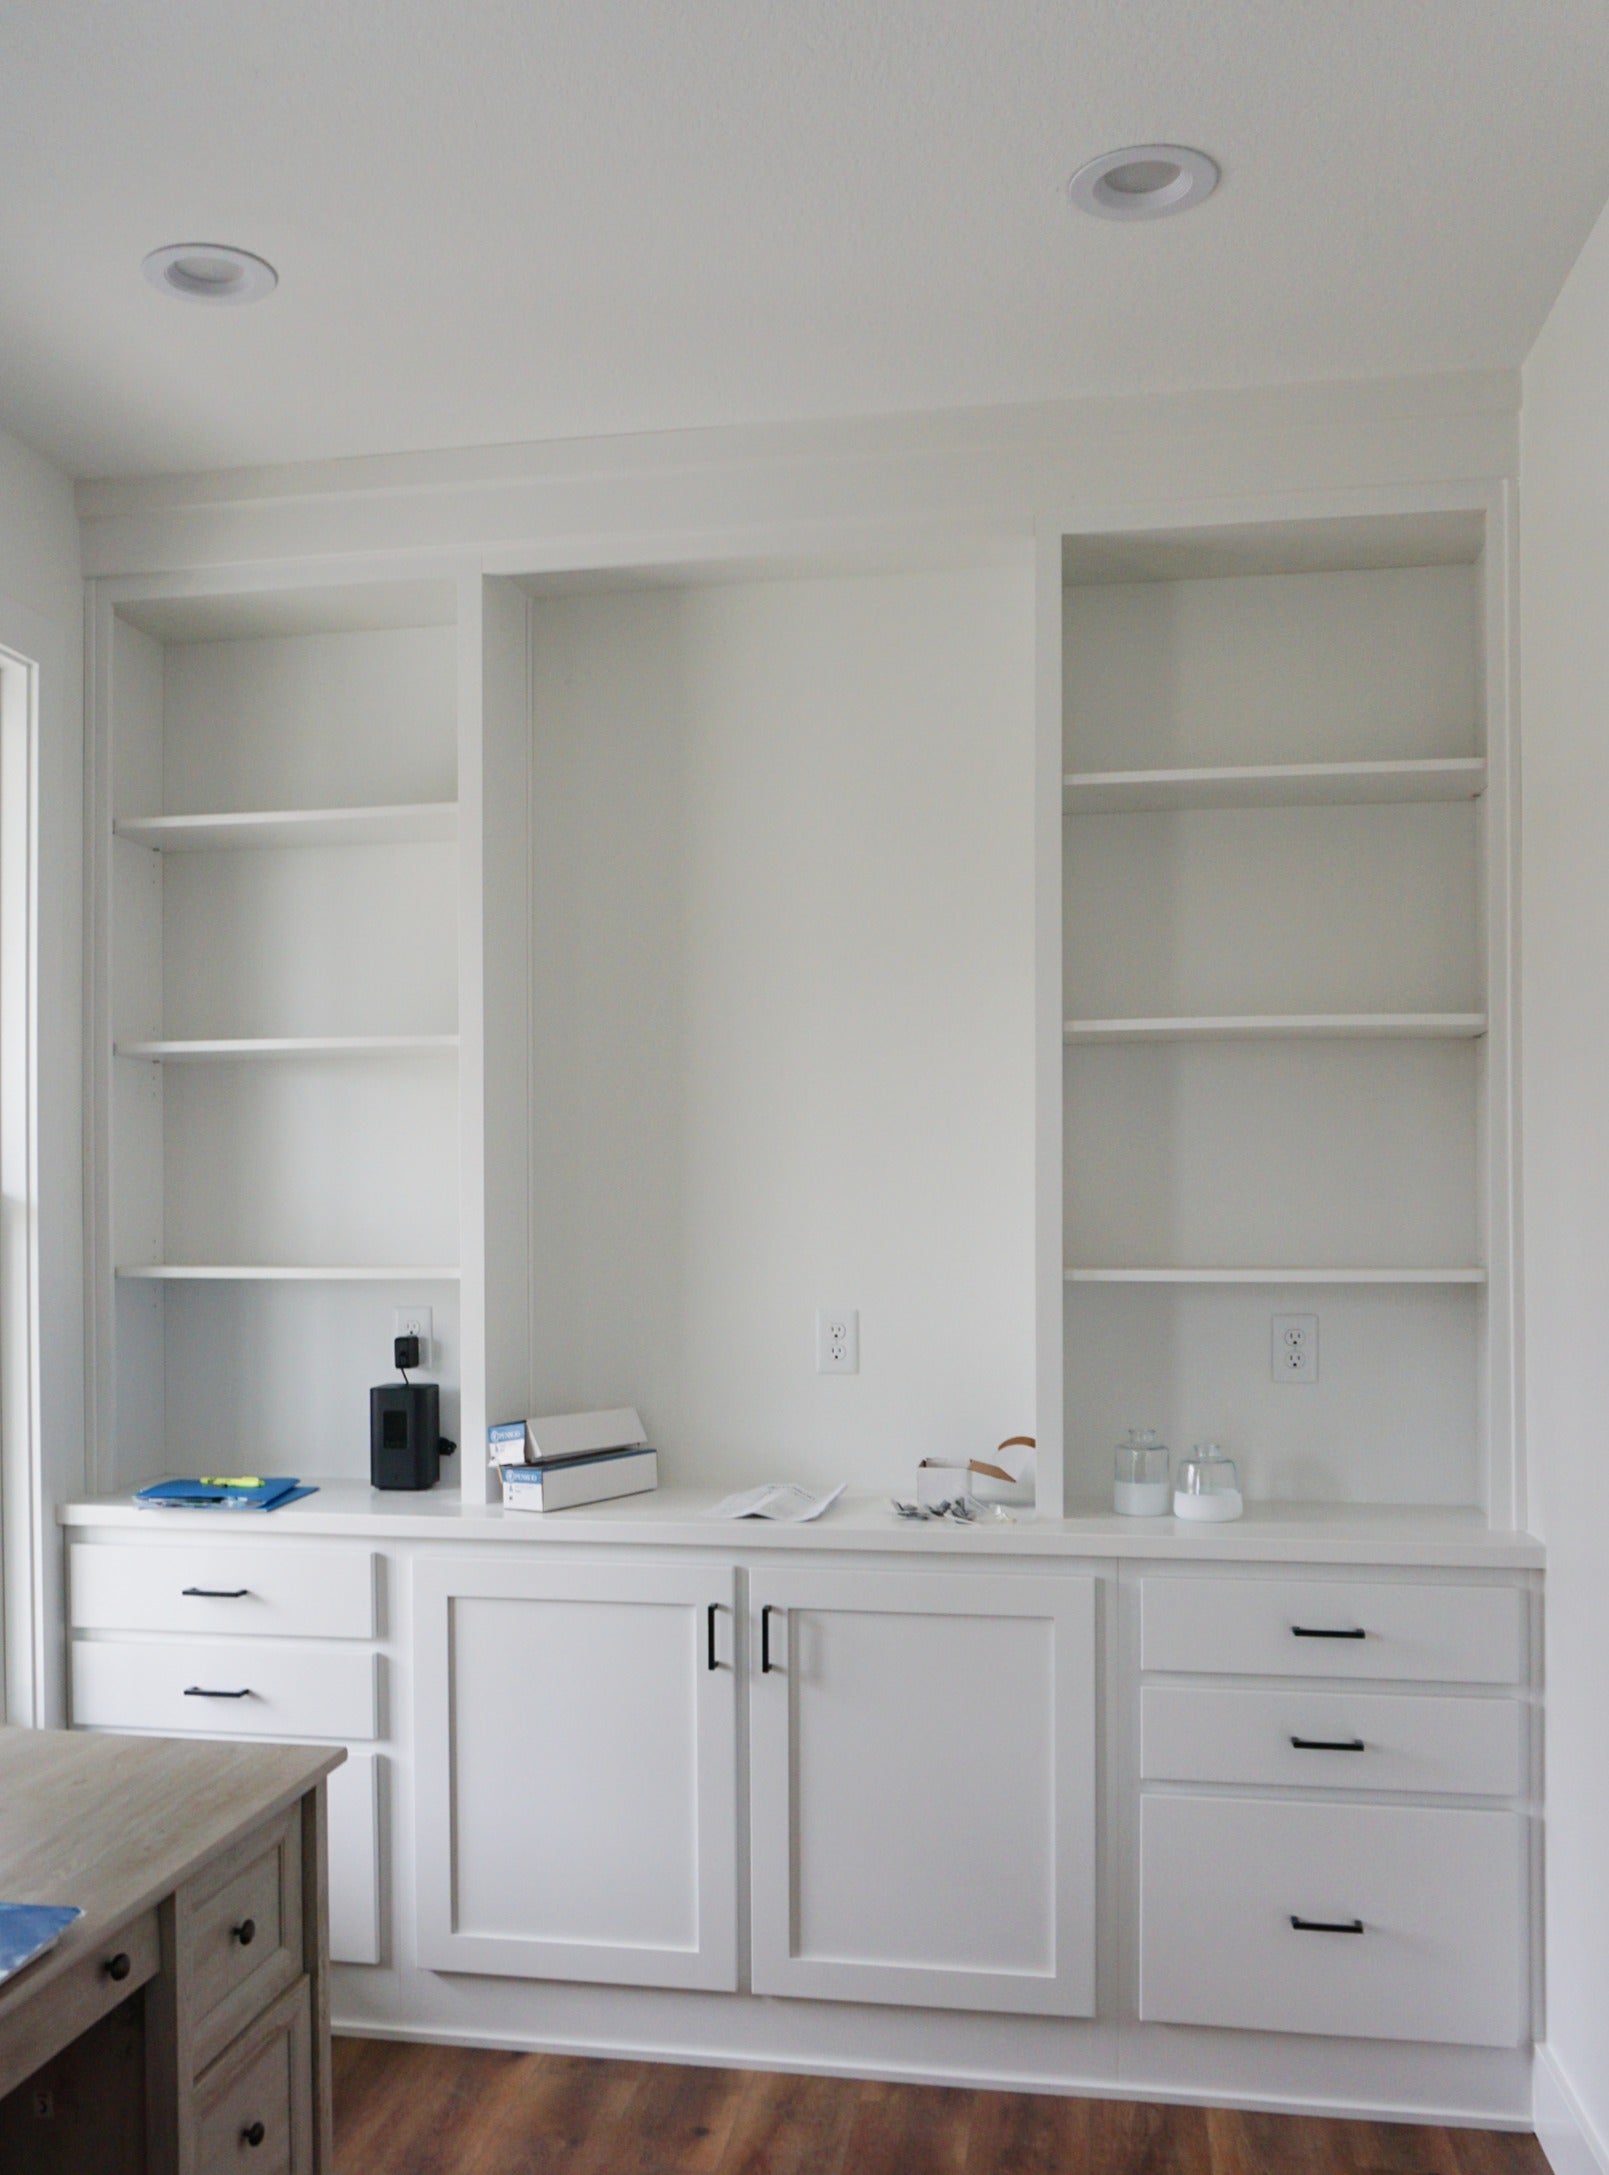 Built In Cabinets and Shelves.jpg